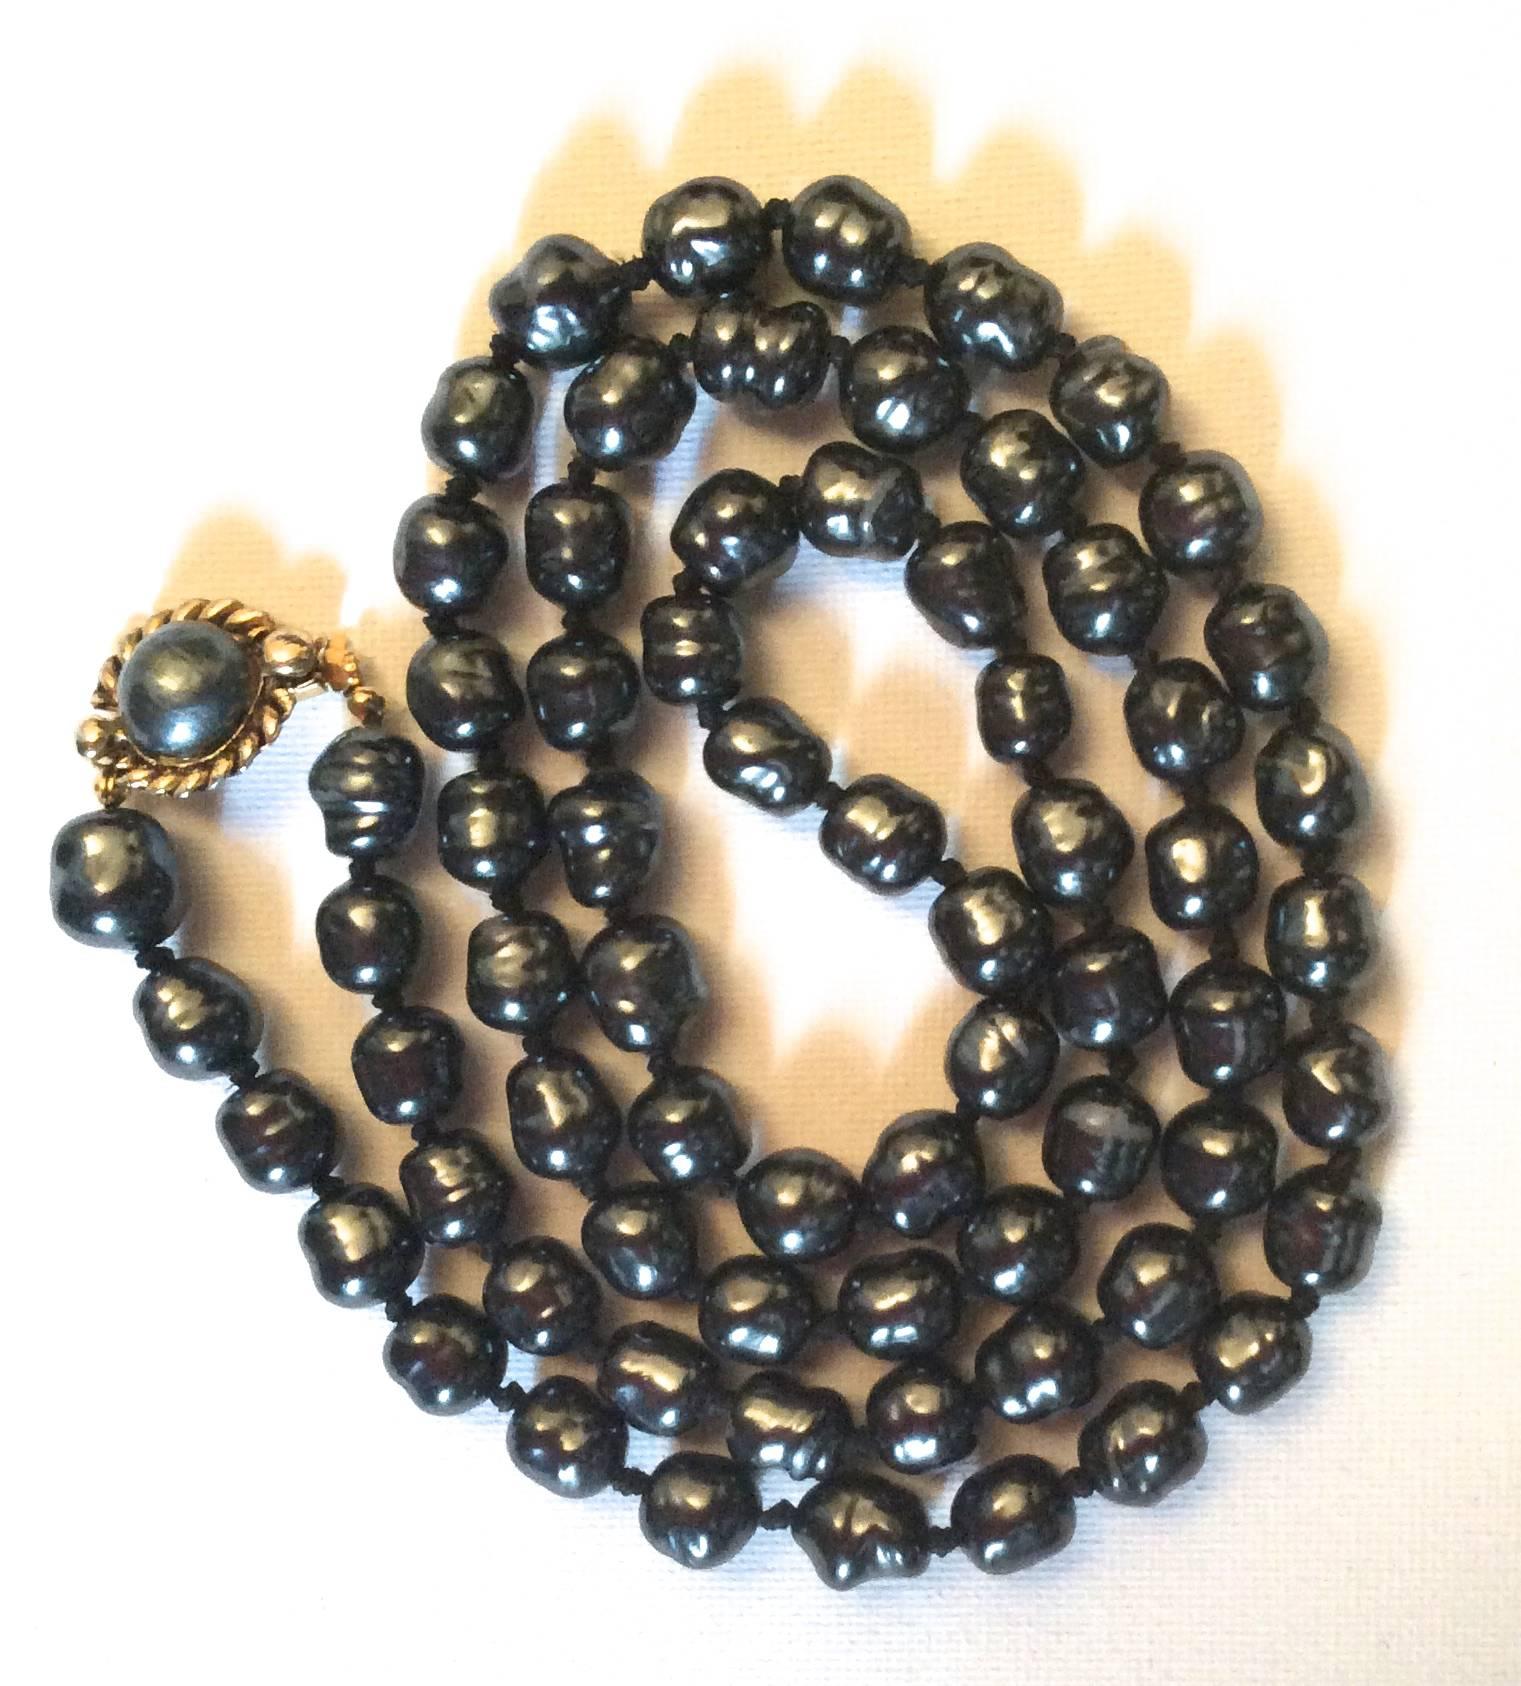 Presented here is a dark gray pearl necklace from Chanel. The necklace is comprised of dark gray pearls irregularly shaped pearls. The shape is more oval-like than a sphere. Please see photography for details of the shape of the pearls. The pearls